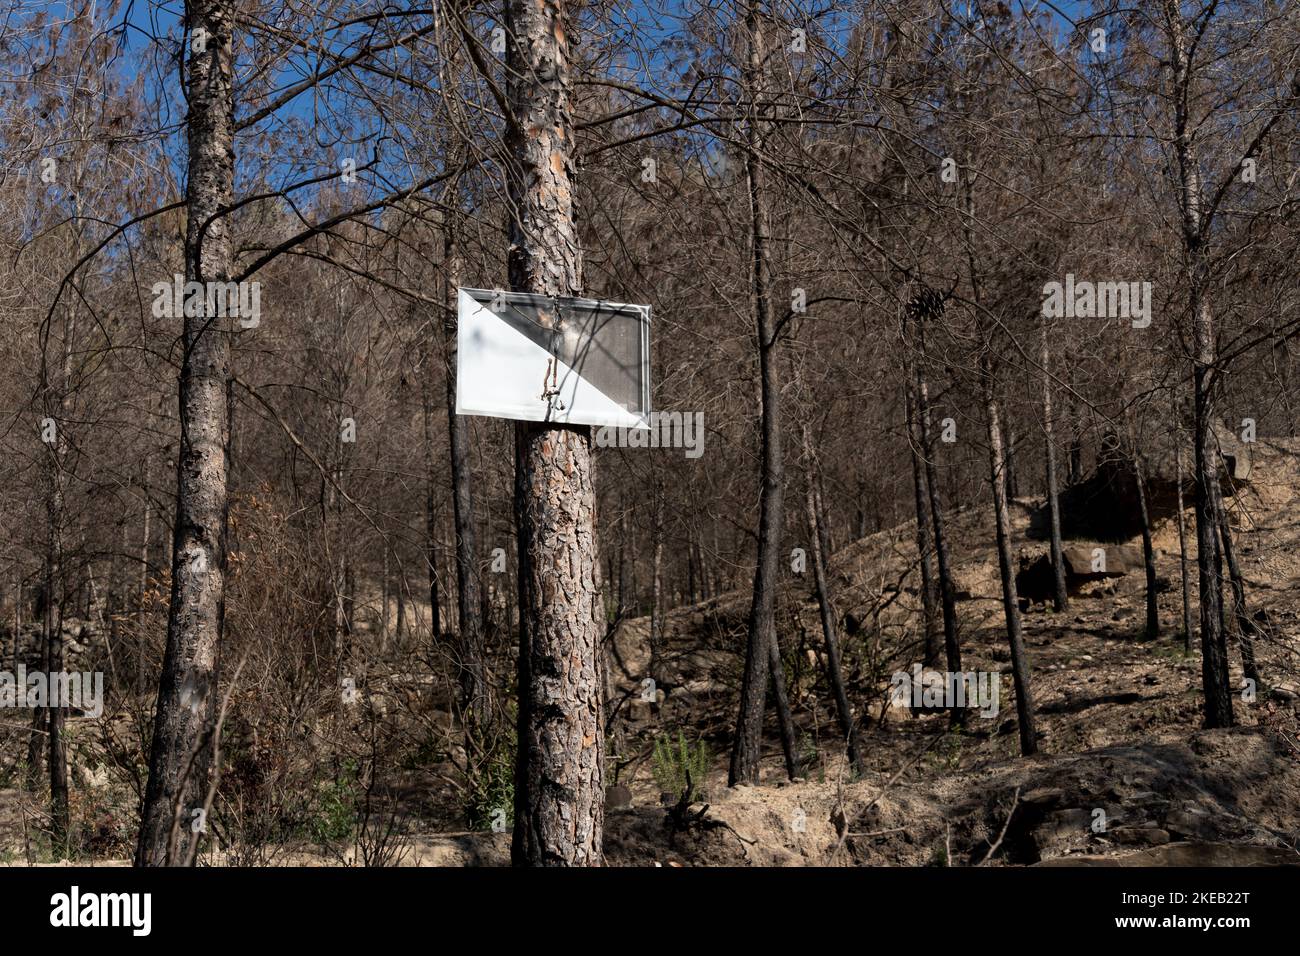 El Pont de Vilomara i Rocafort, Barcelona, Spain - November 10, 2022: Private hunting sign in Spain, nailed to a pine burned by forest fire Stock Photo